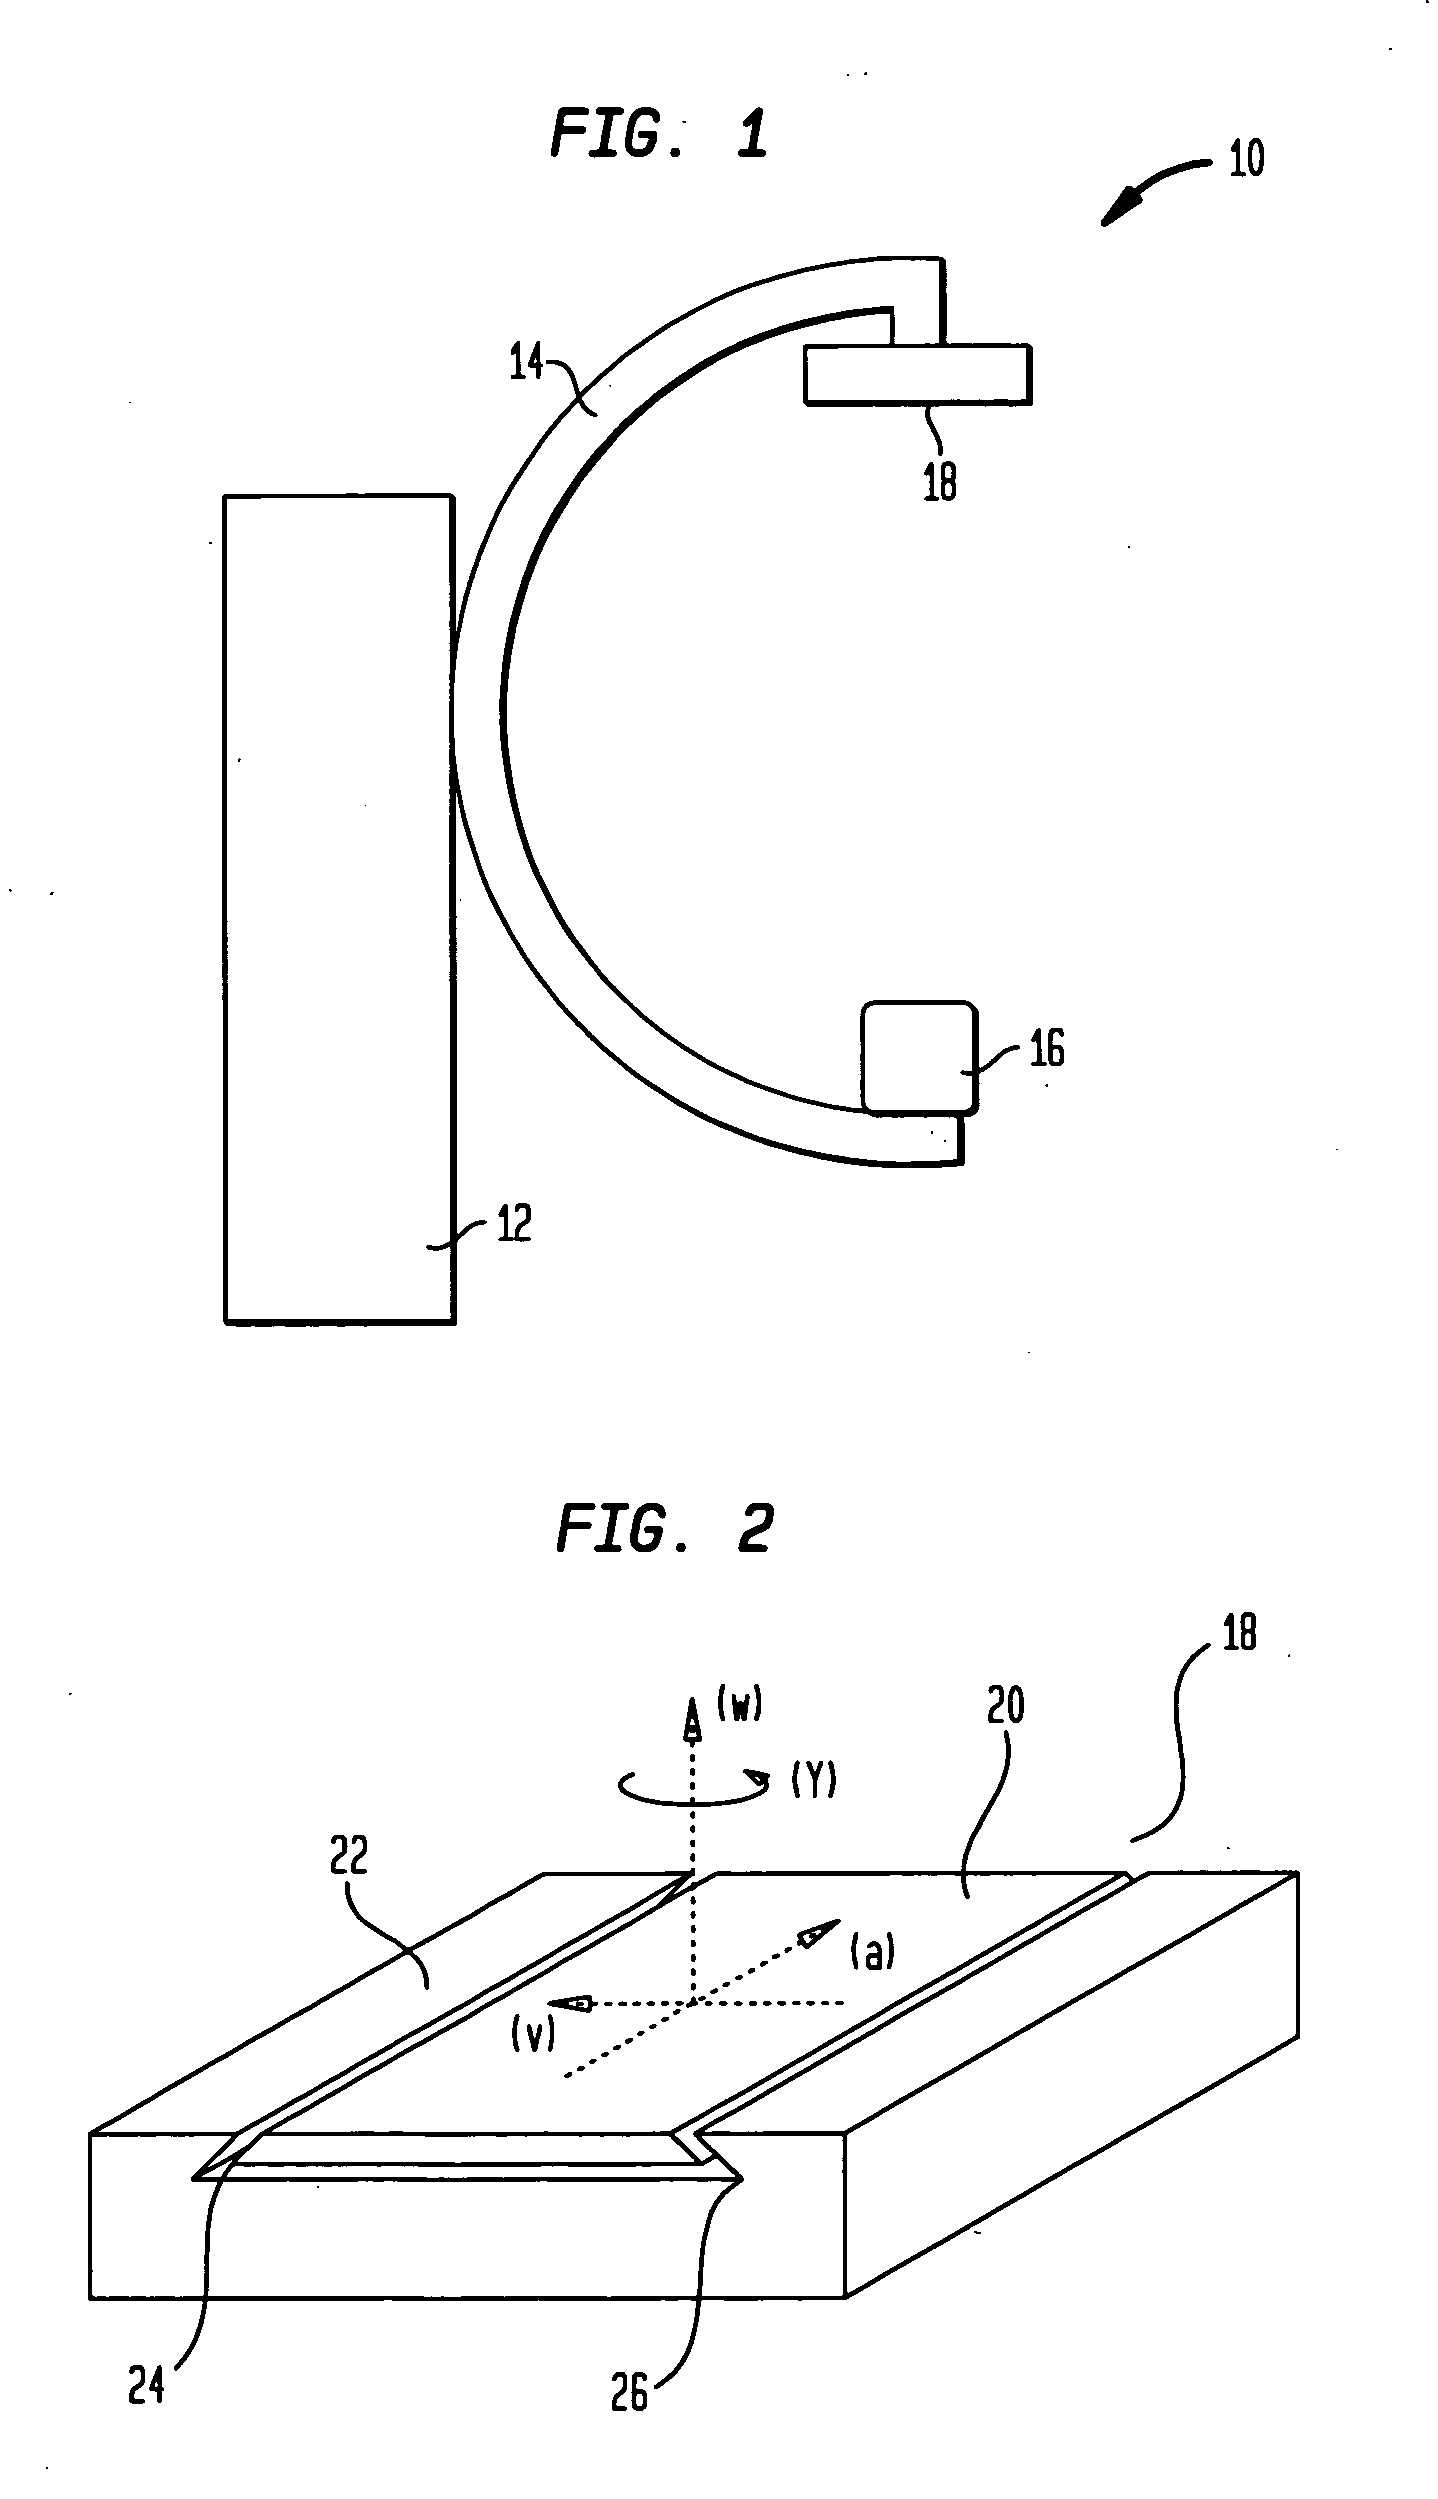 C-arm device with adjustable detector offset for cone beam imaging involving partial circle scan trajectories